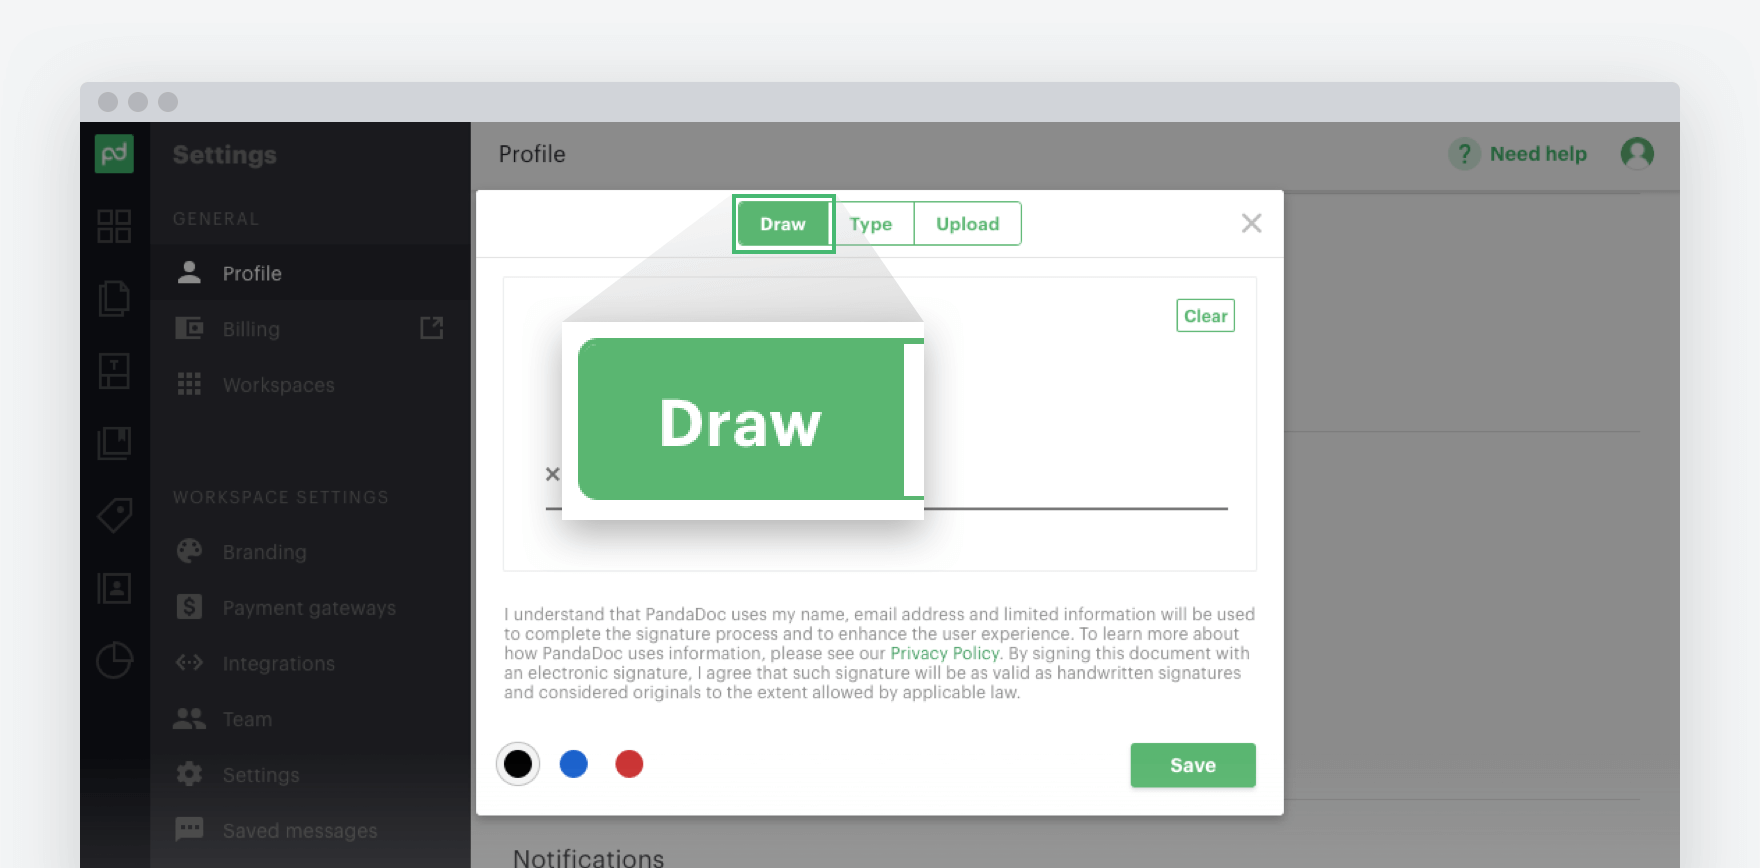 Select_Draw_from_the_menu_at_the_top_of_the_popup_window